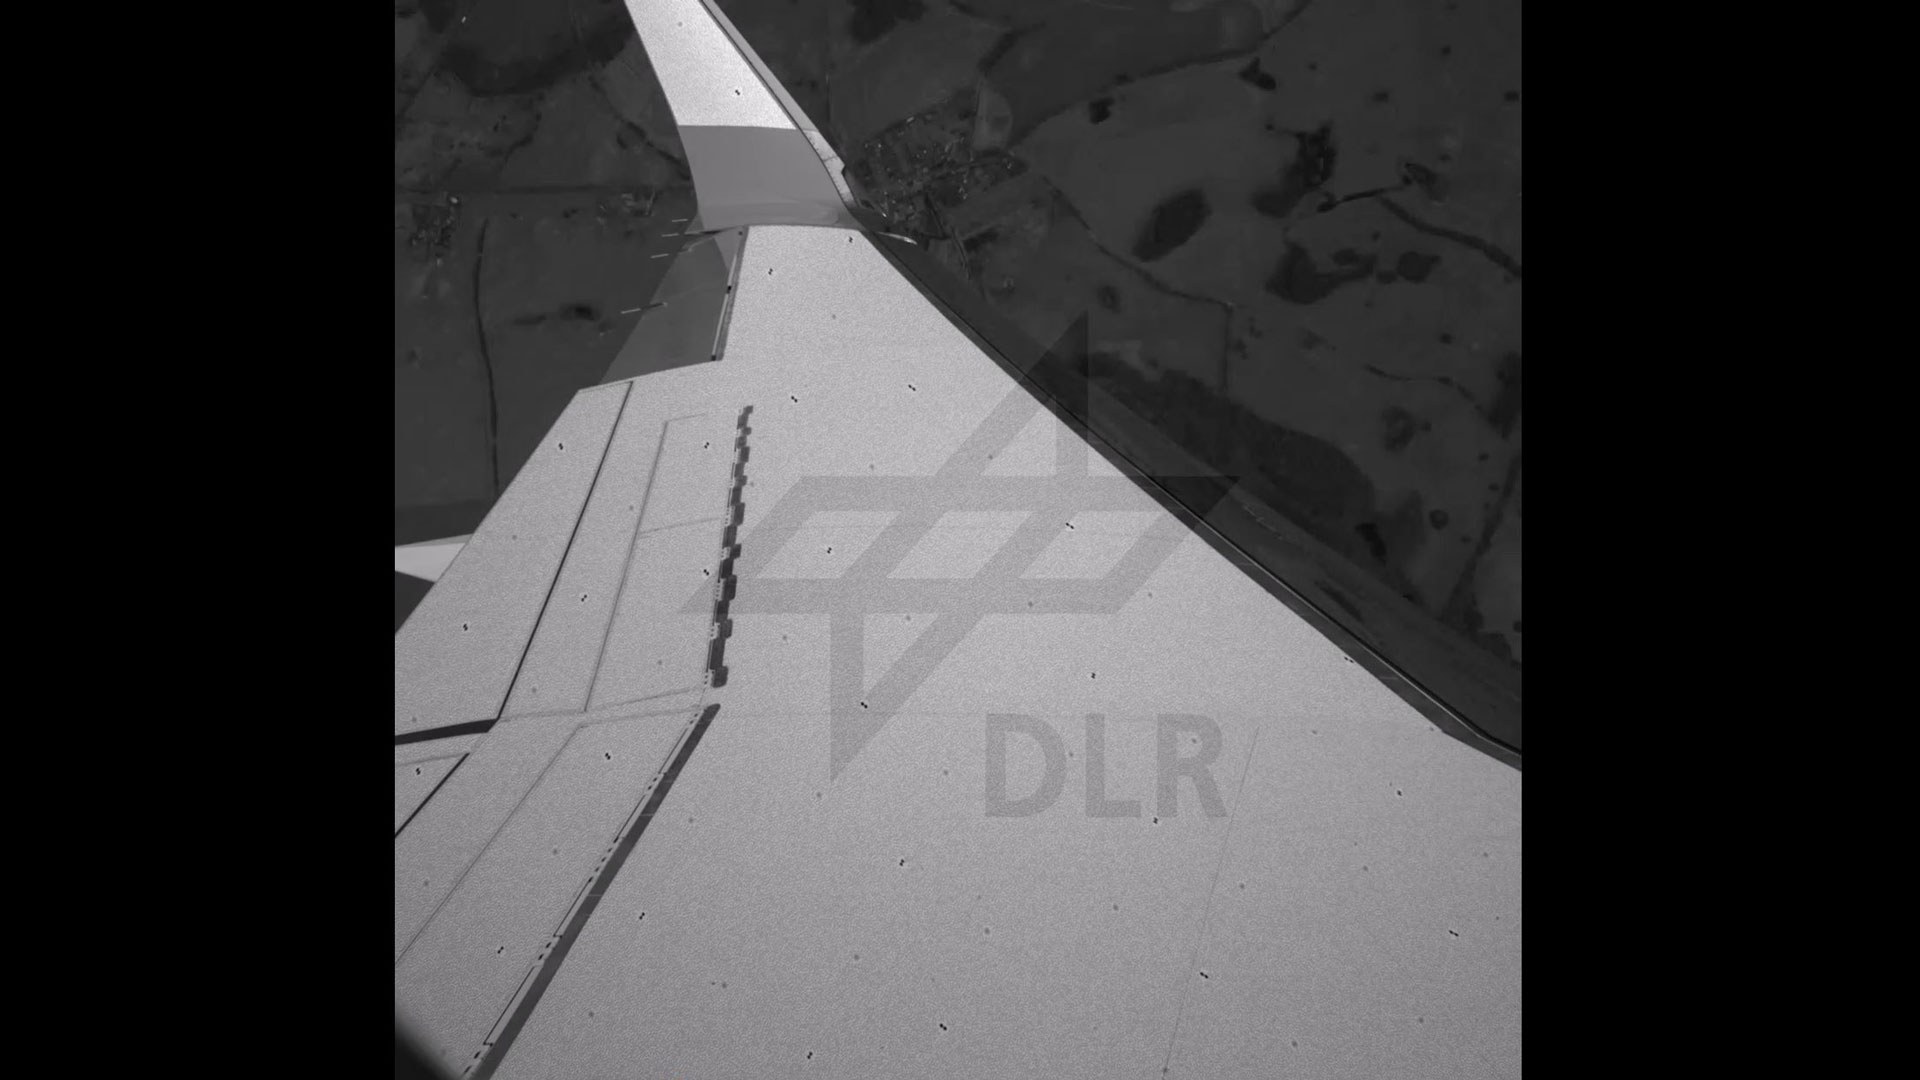 Preview image: Deformation of the ISTAR wing, taken from the interior camera.